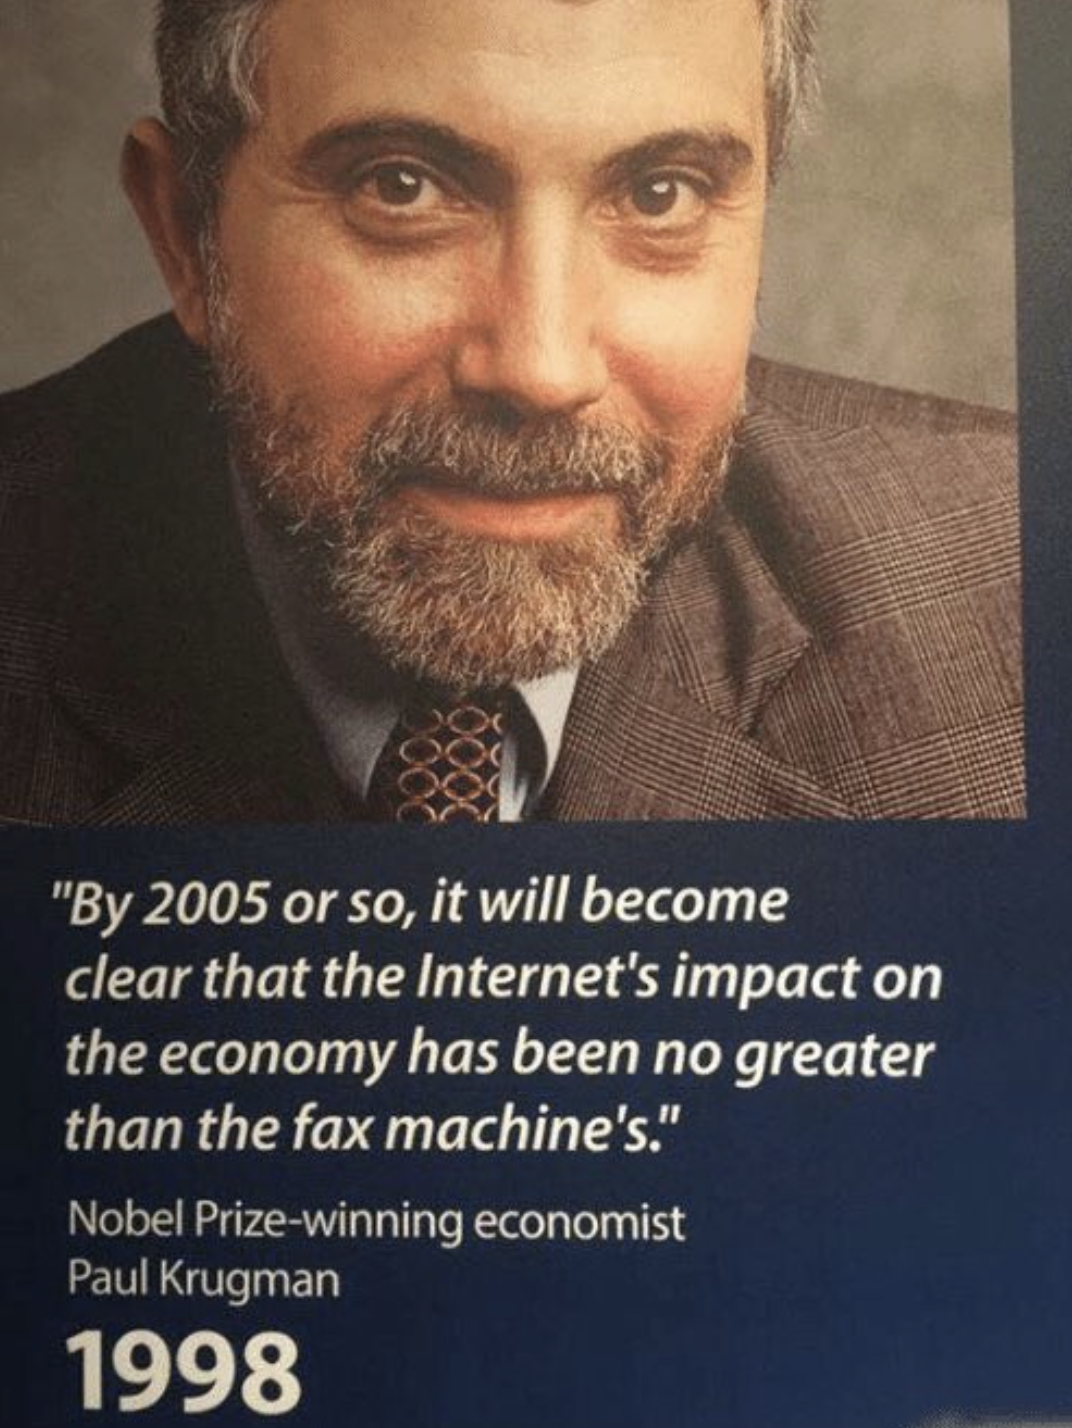 paul krugman internet - "By 2005 or so, it will become clear that the Internet's impact on the economy has been no greater than the fax machine's." Nobel Prizewinning economist Paul Krugman 1998